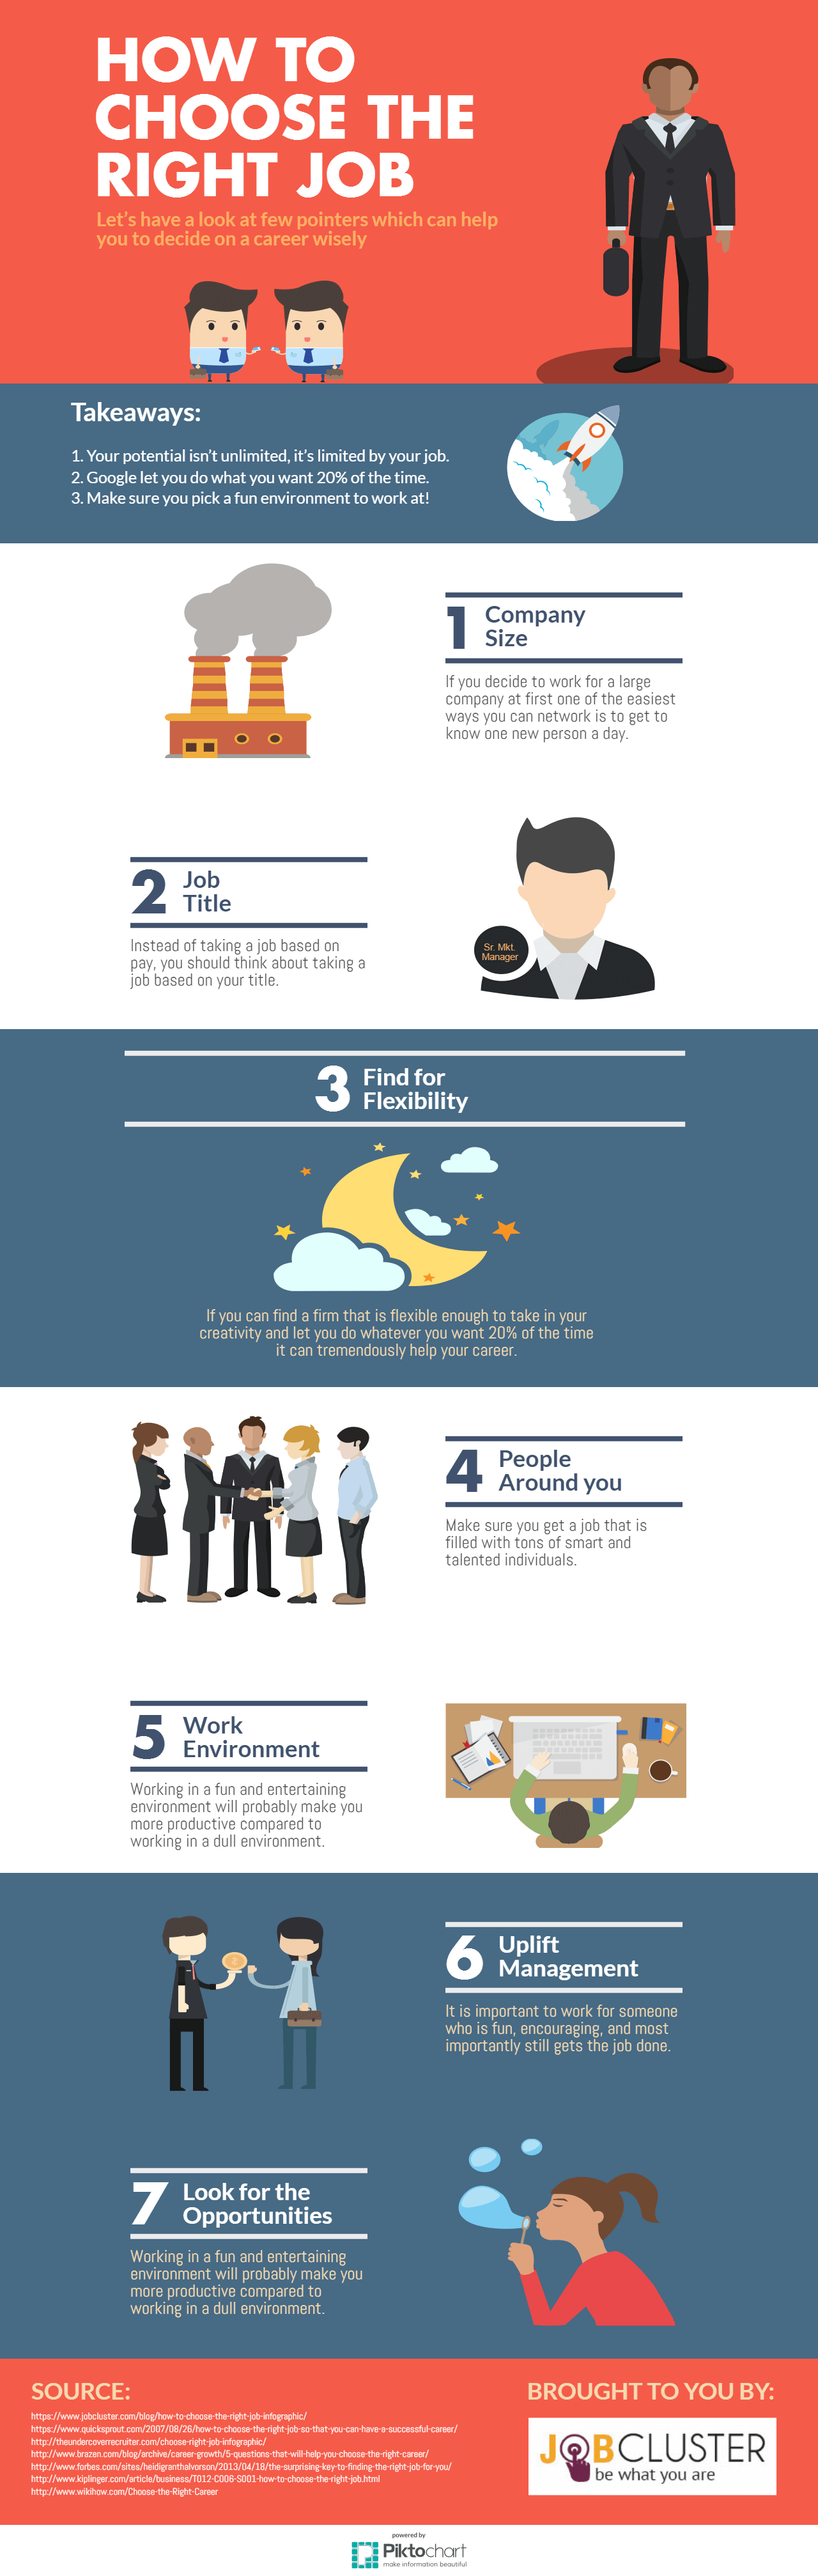 how to choose the right job- infographic